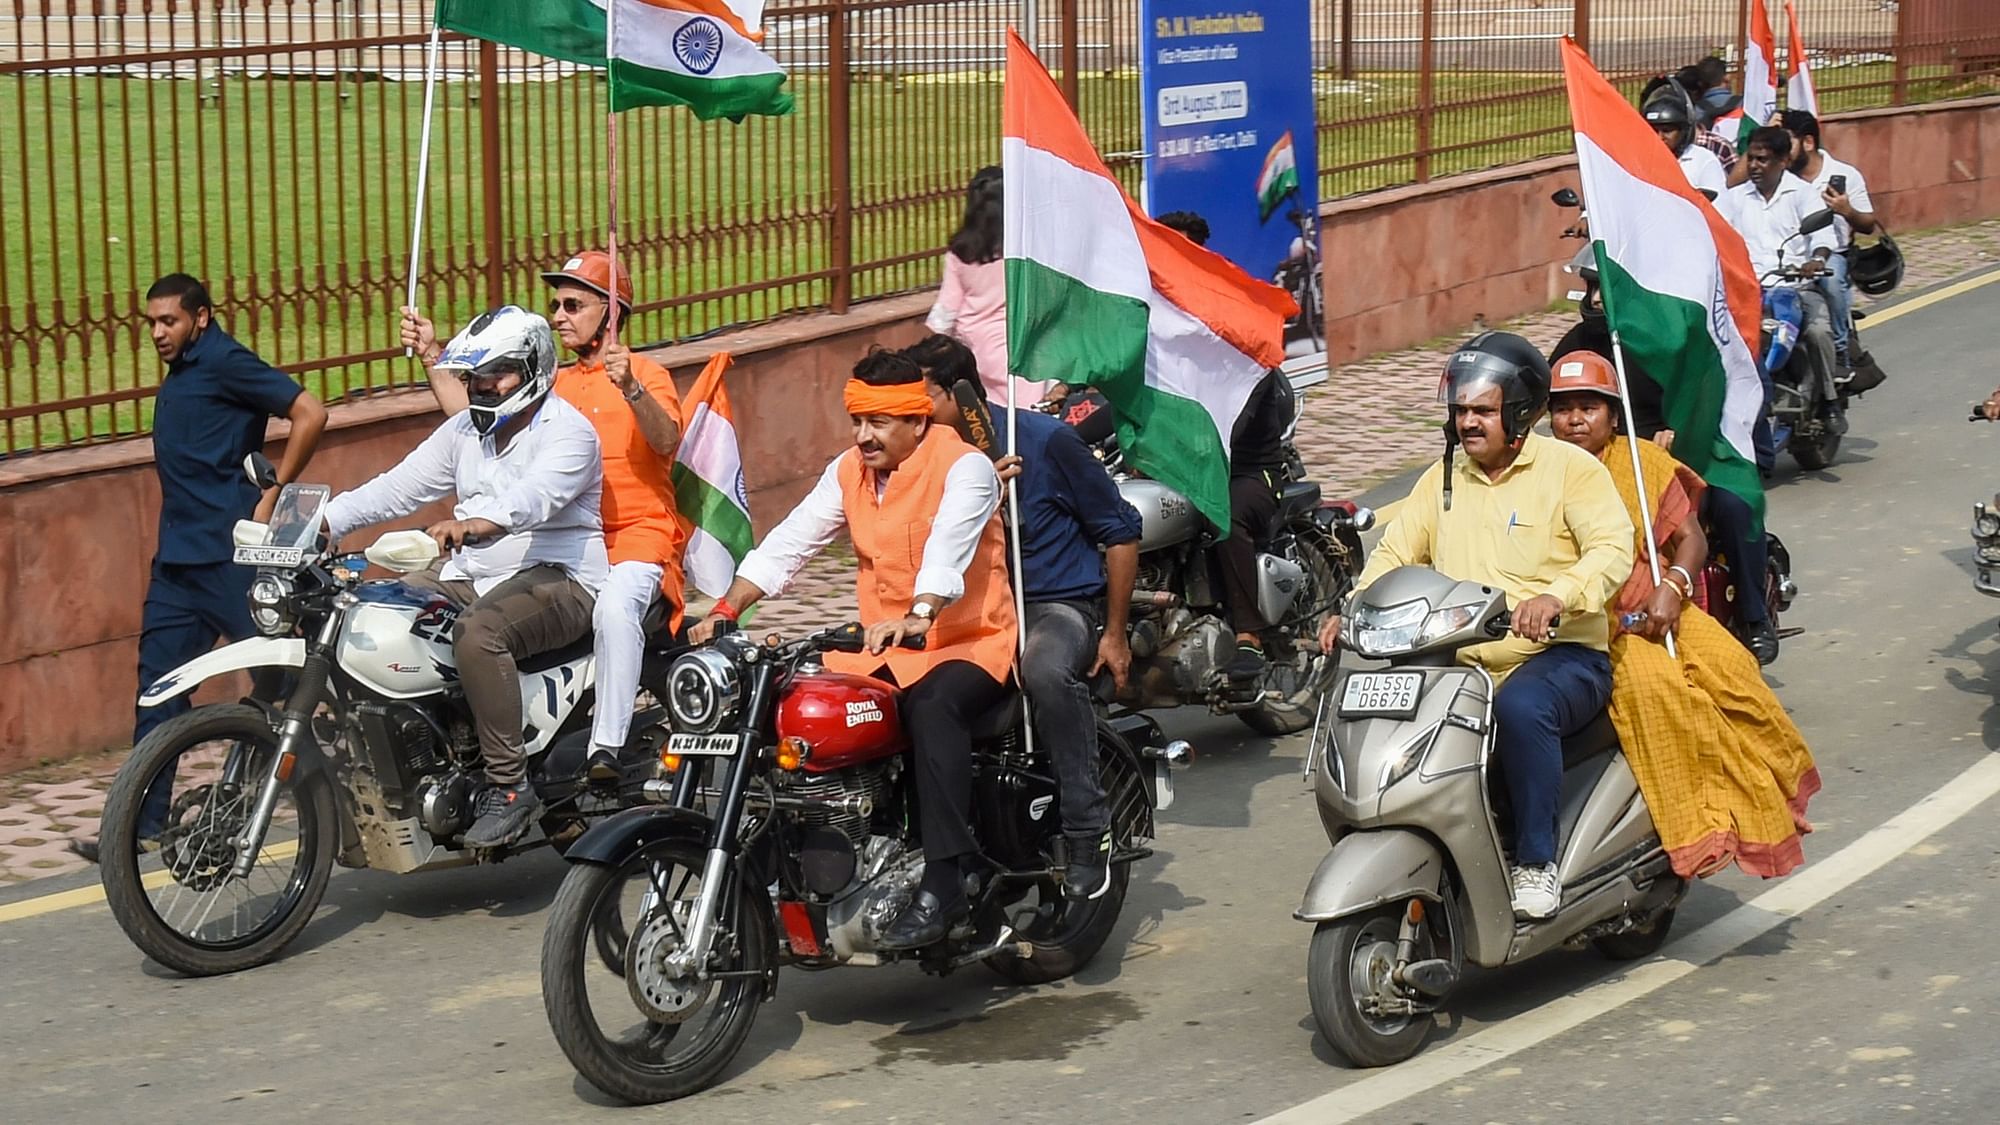 <div class="paragraphs"><p>BJP MP Manoj Tiwari rides a motorcycle along with other MPs as he takes part in the Tiranga Bike Rally for the MPs of all parties, at Red Fort in old Delhi, on Wednesday morning, 3 August.</p></div>